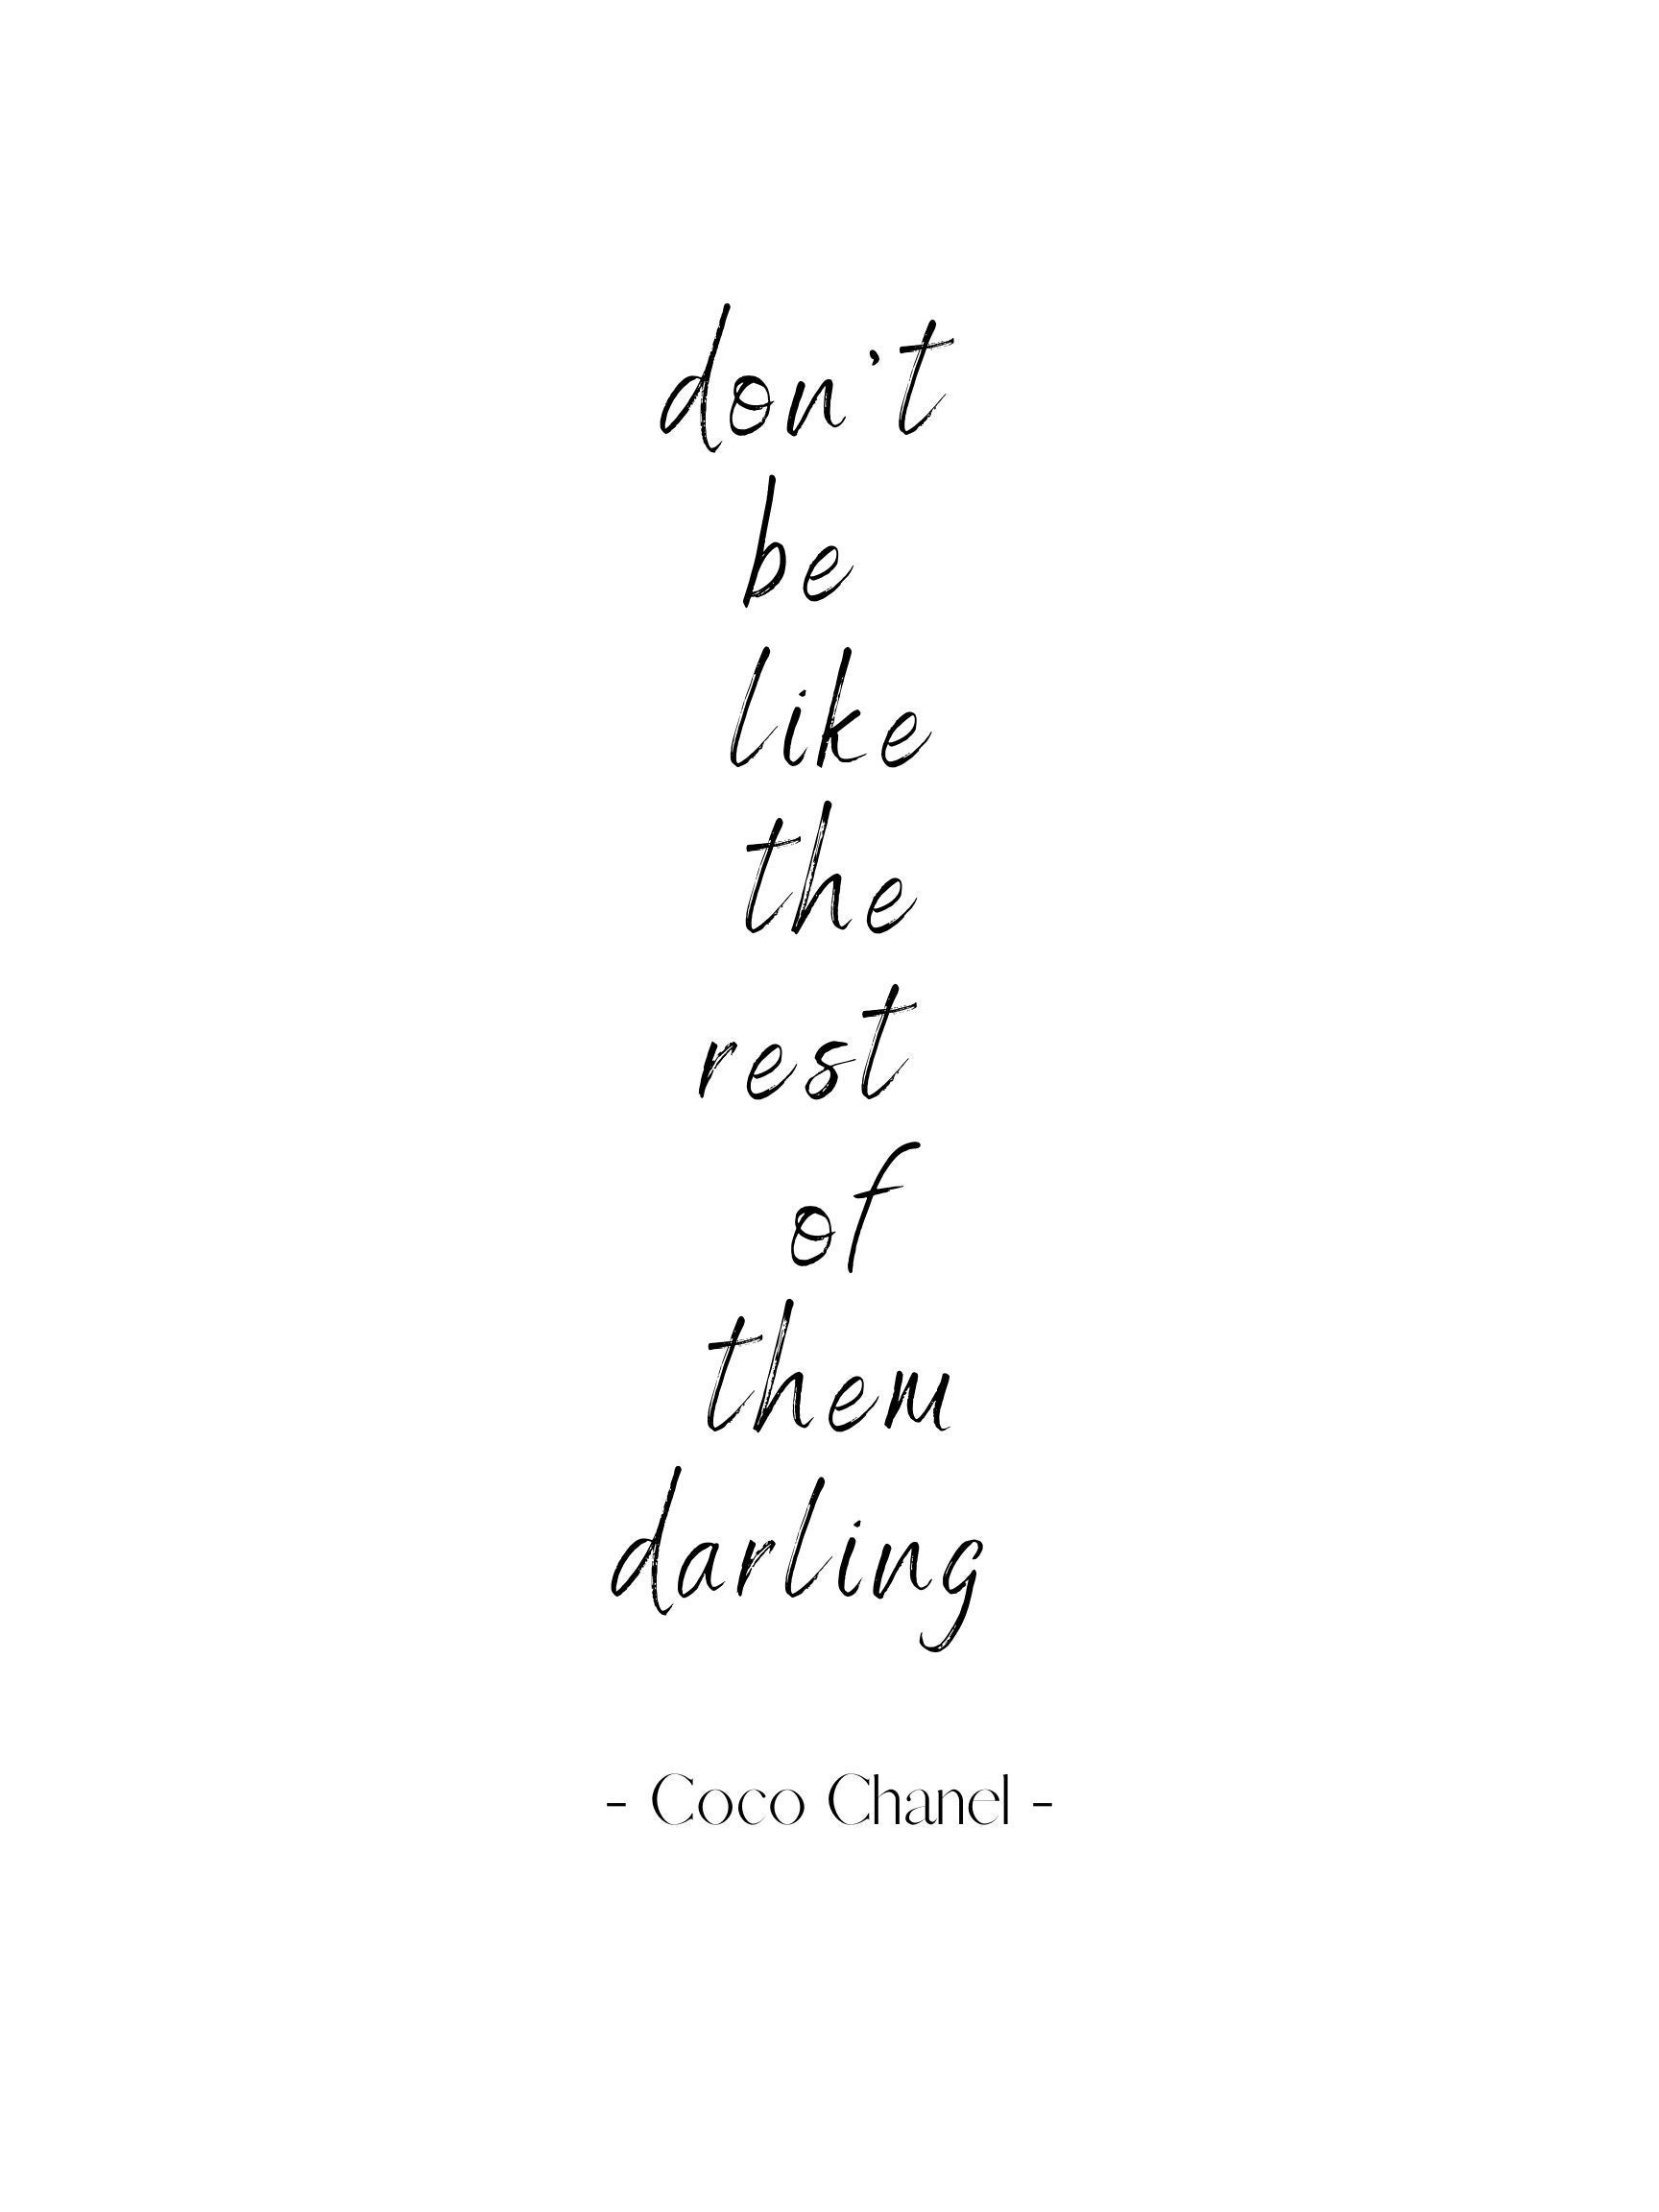 Don't be like the rest of them Darling - Coco Chanel Wall Quote, Wall Art  Sticker [White]